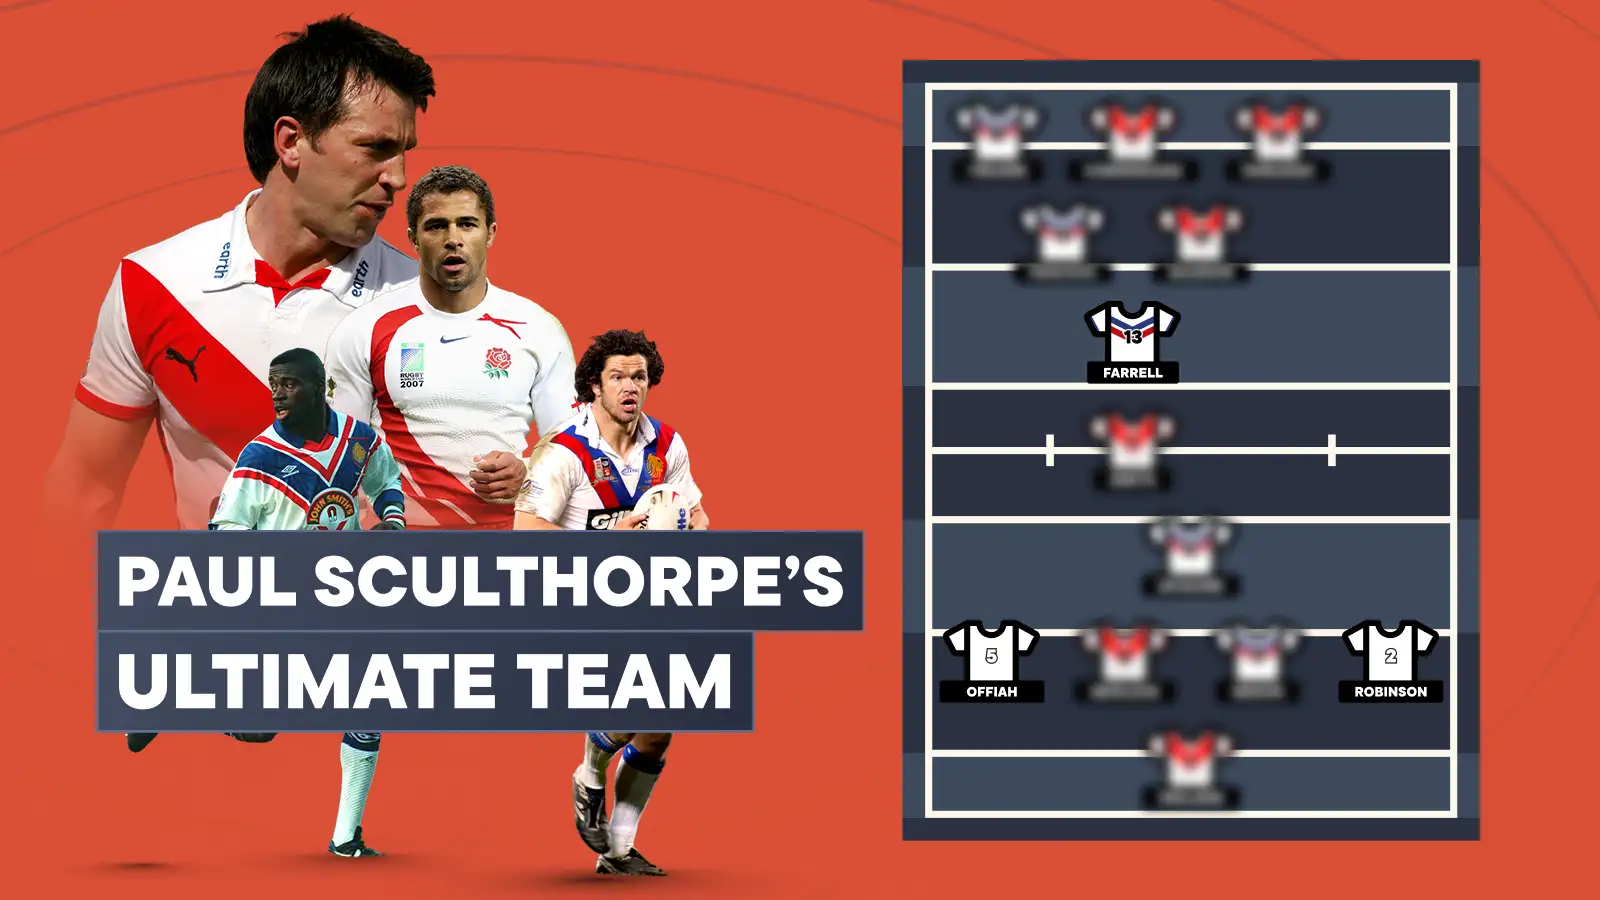 My Ultimate Team: Paul Sculthorpe selects his best 1-17 including St Helens, Great Britain stars